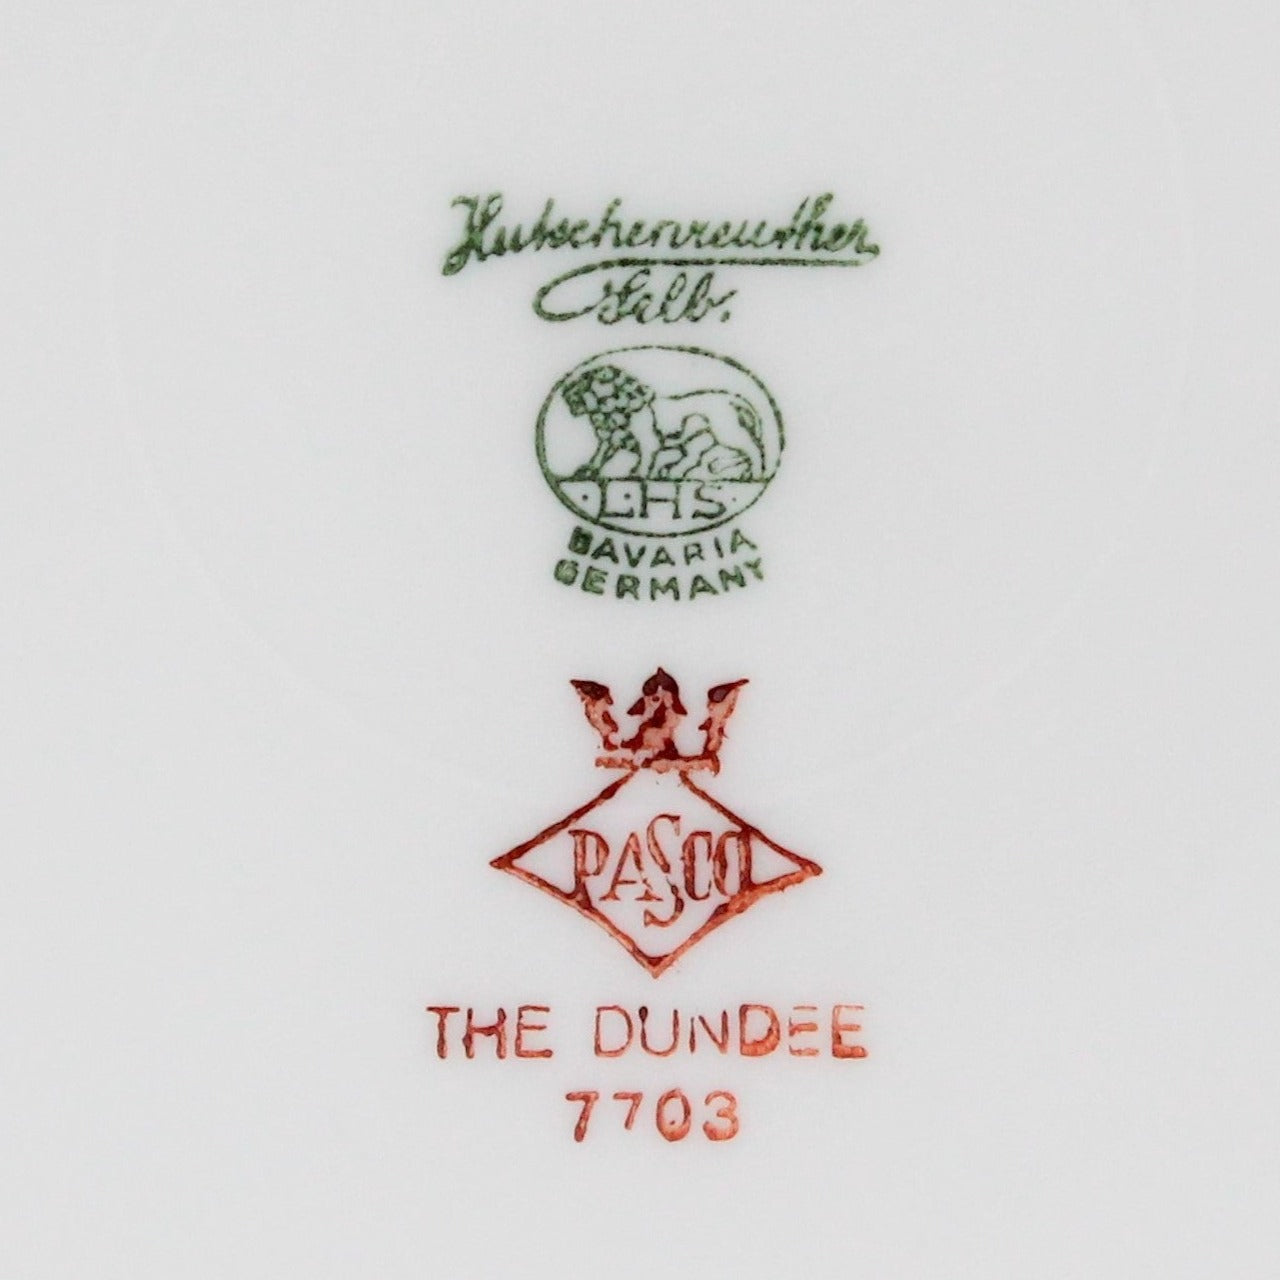 The Dundee by Hutschenreuther Selb, LHS, Bavaria, Germany 1962